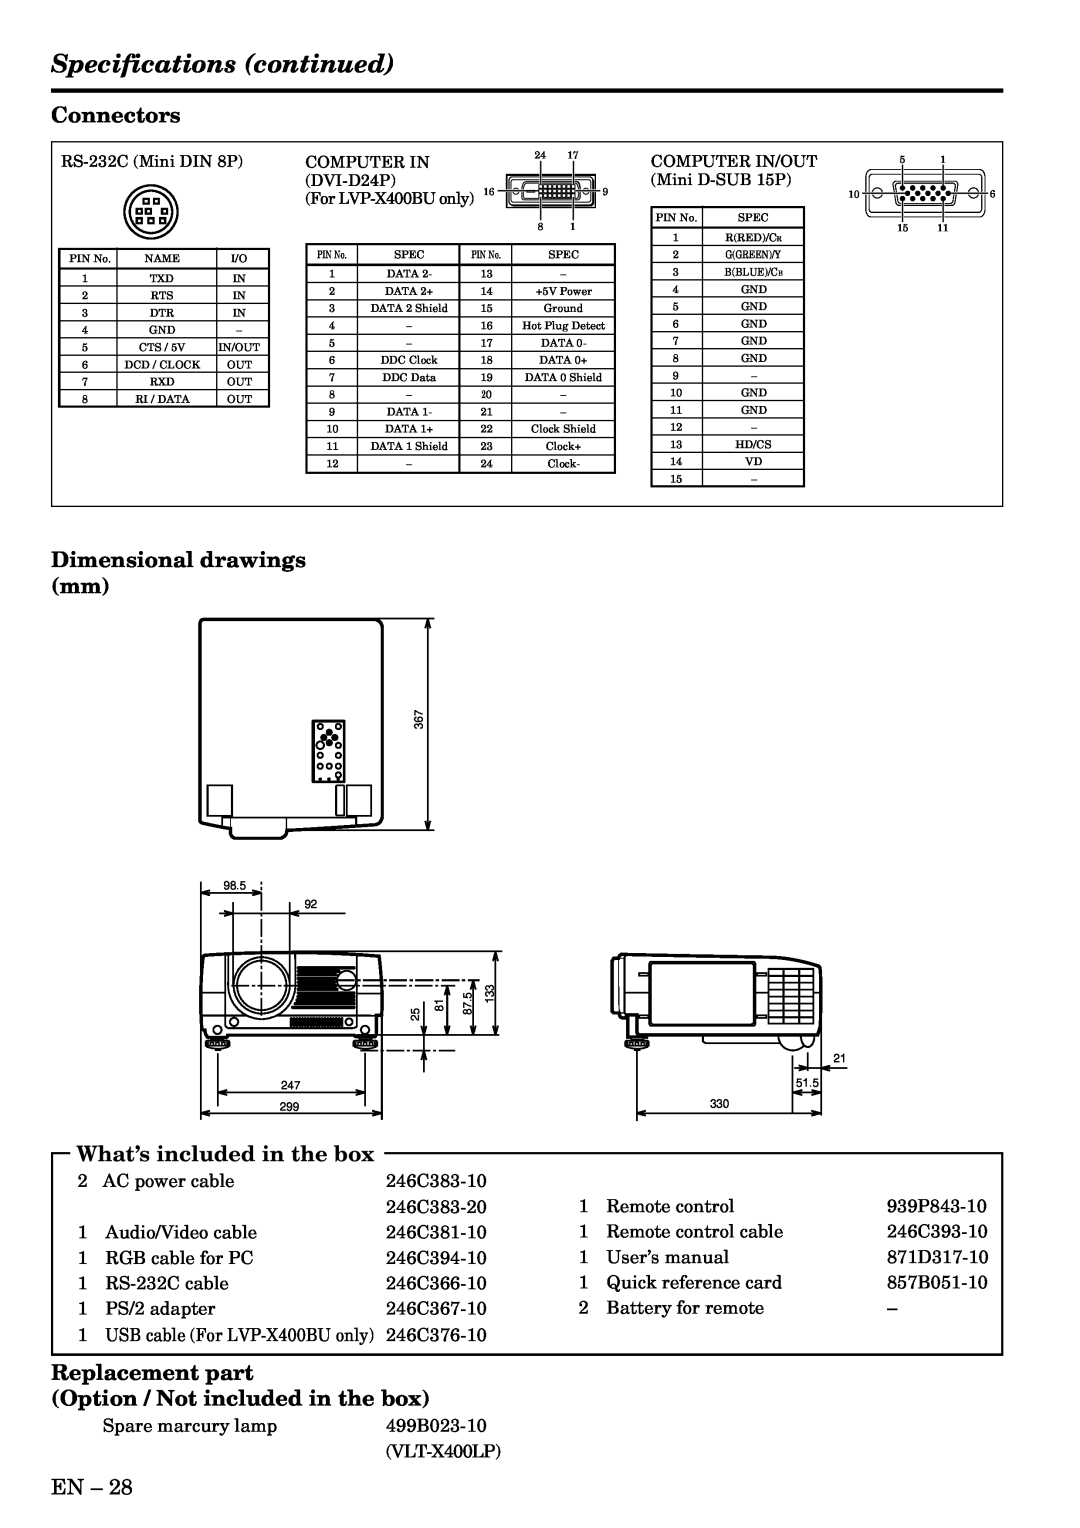 Mitsubishi Electronics LVP-X400BU Specifications continued, Connectors, Dimensional drawings mm, Replacement part 